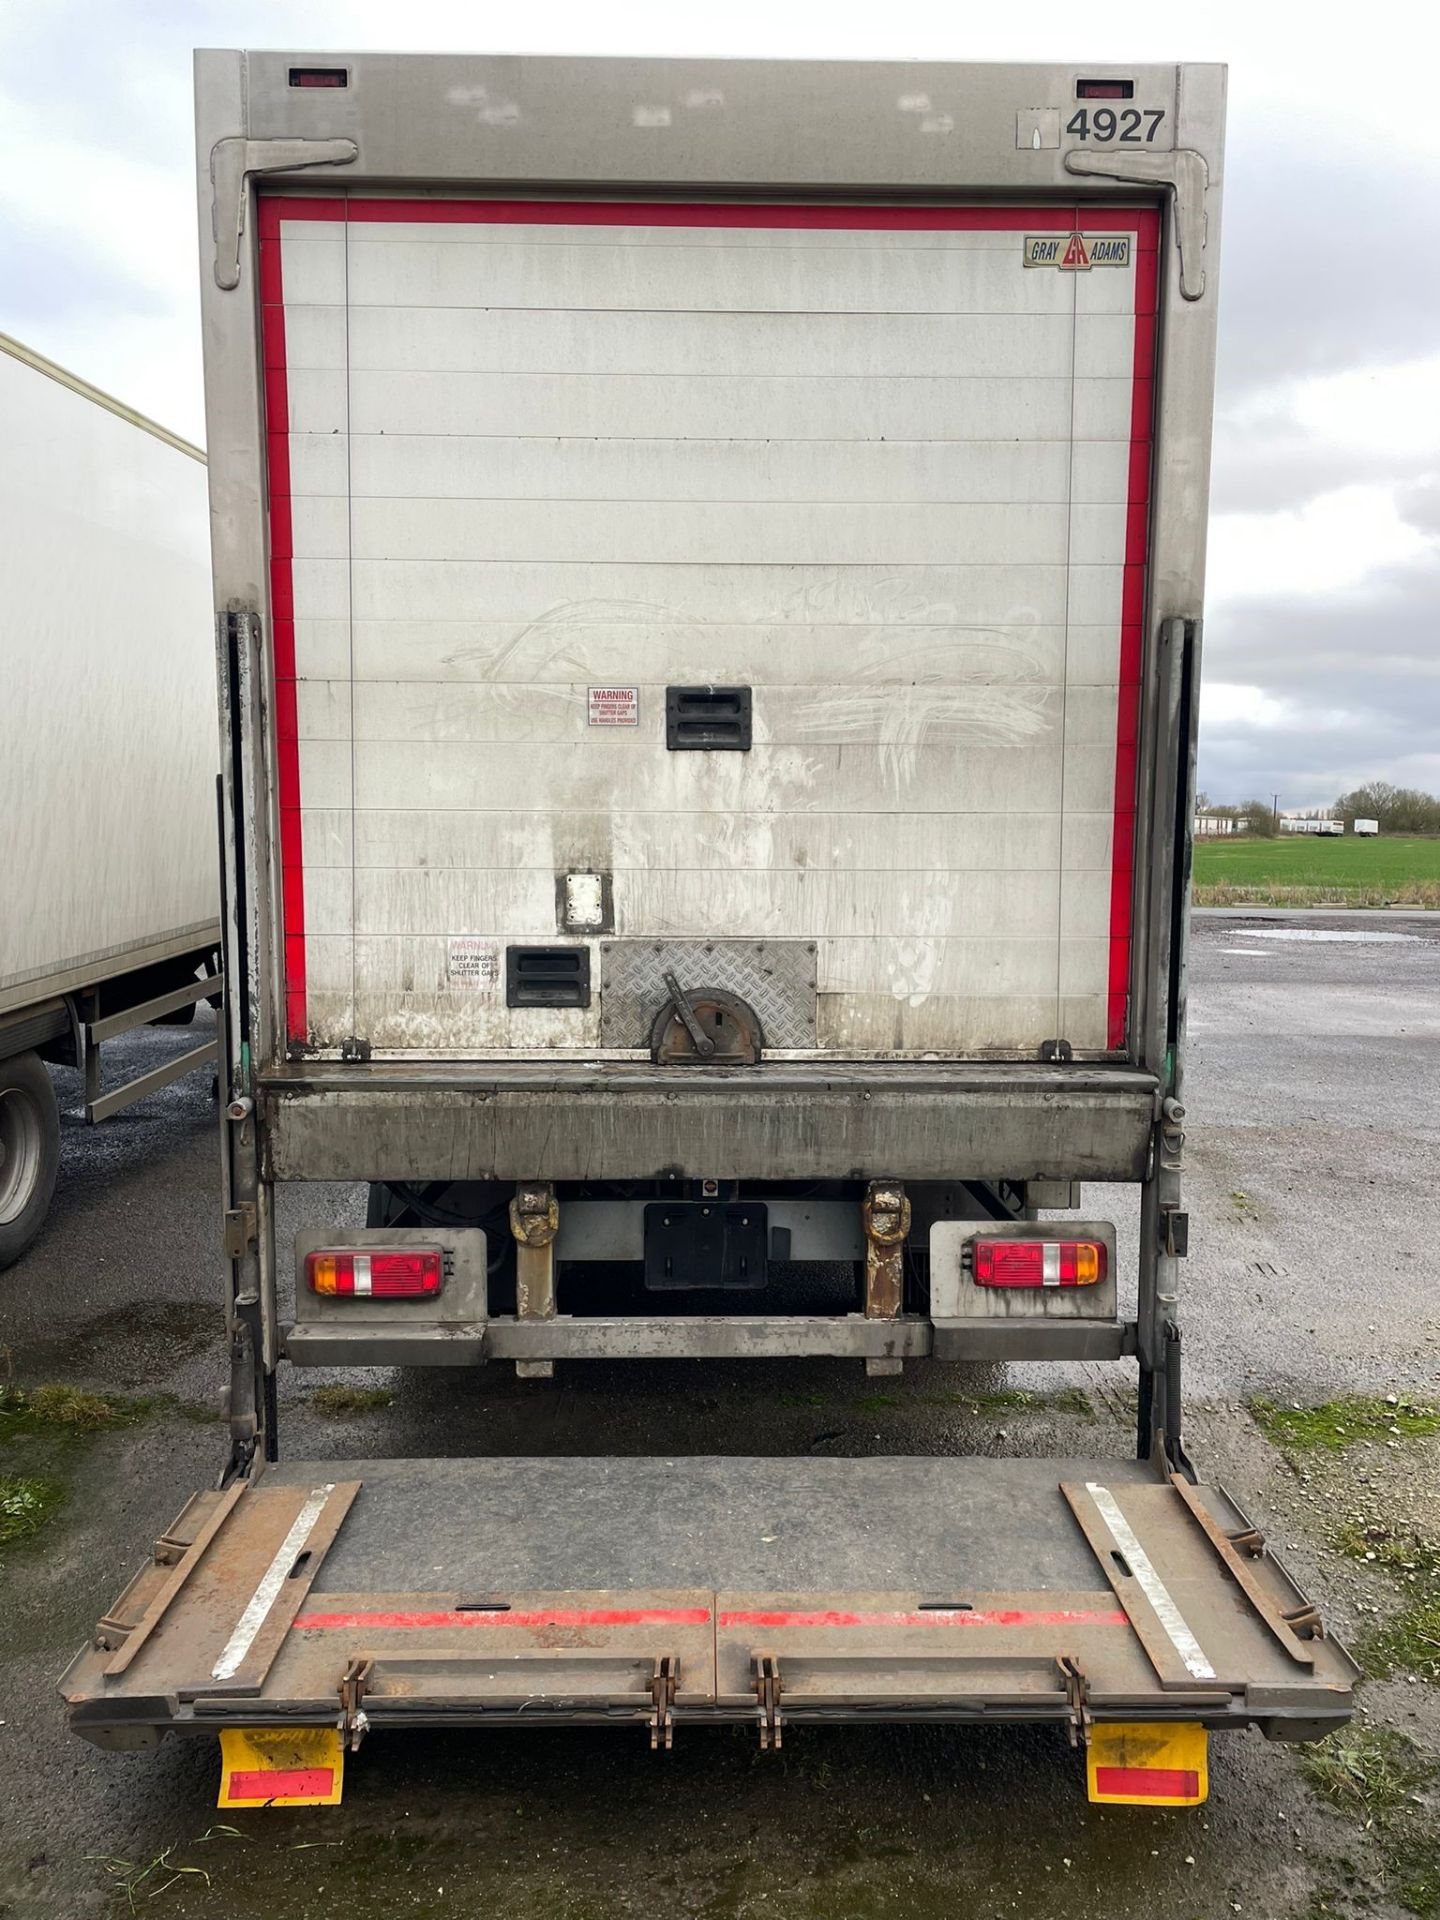 Trailer 4927 - 2013 G&A 10.4m Tandem Refrigerated Multi-Temp Trailer - Image 12 of 14